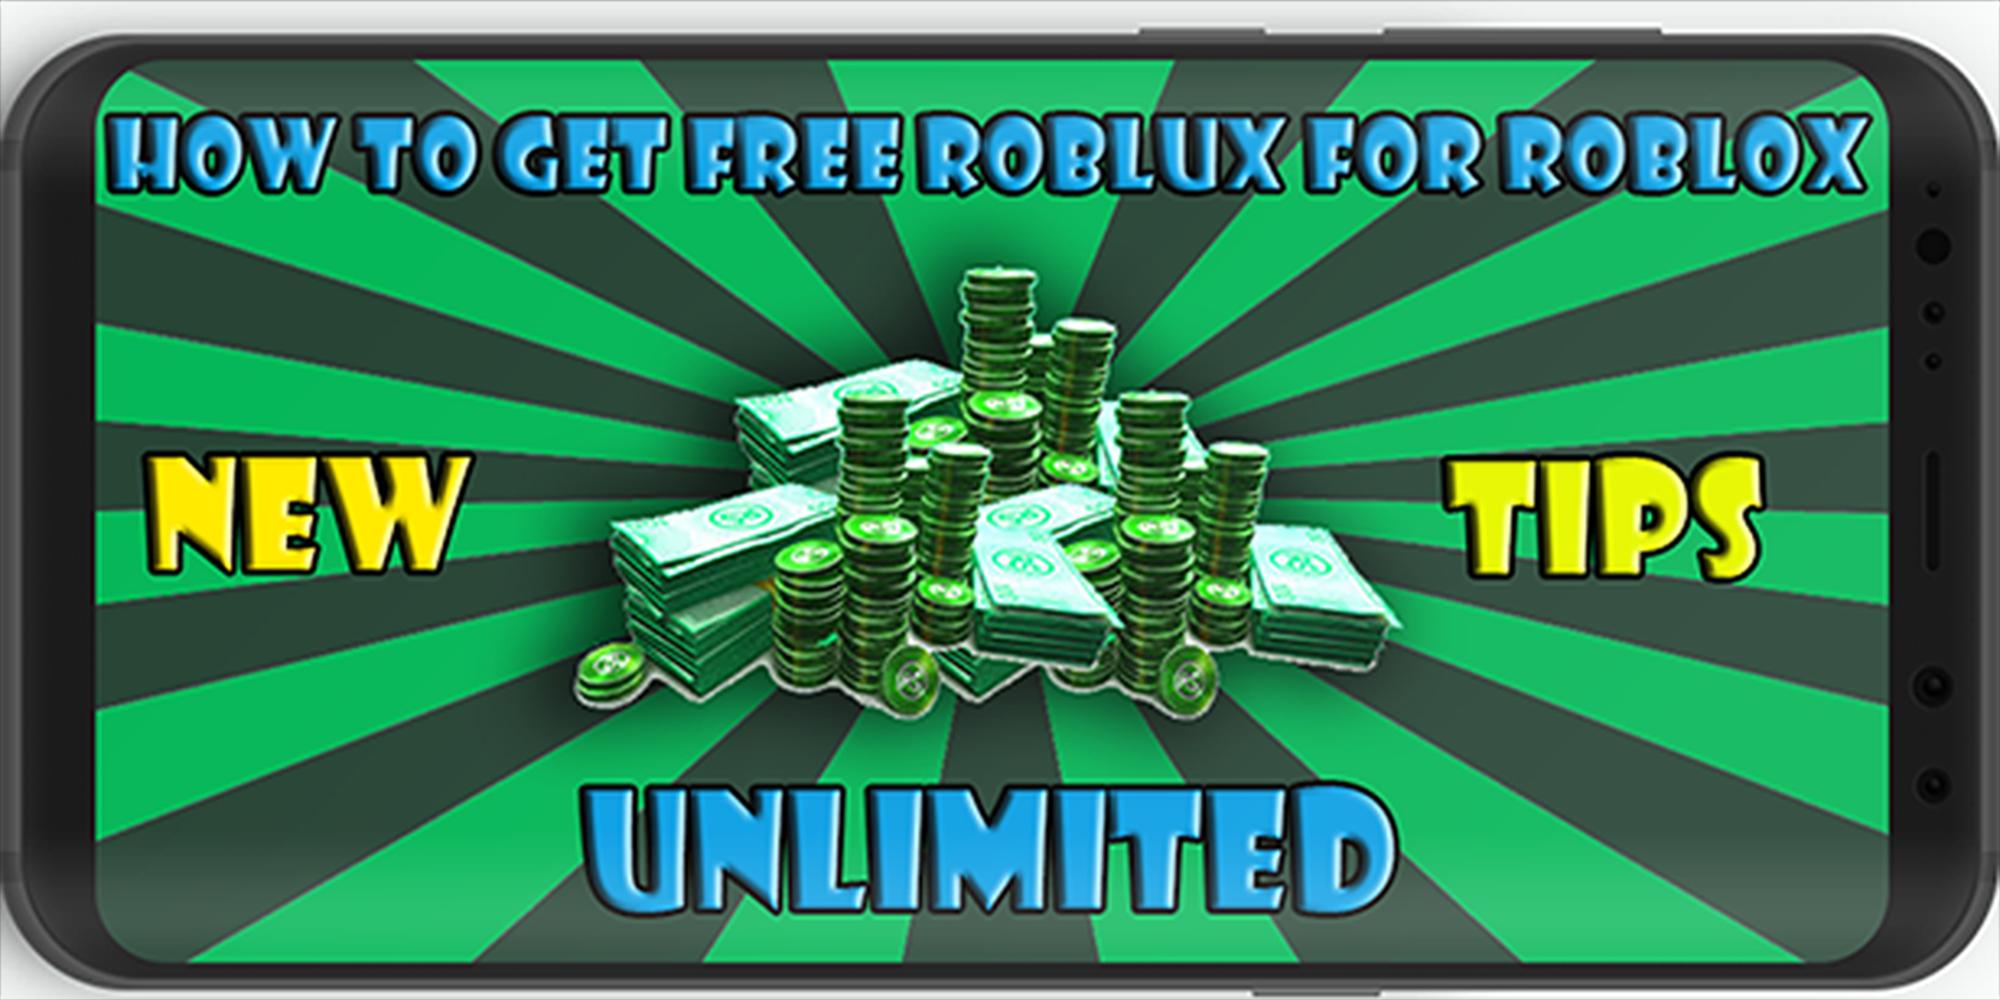 Guide Of How To Get Free Robux For Roblox Tips For Android - new tips for robux and roblox 2018 pro for android apk